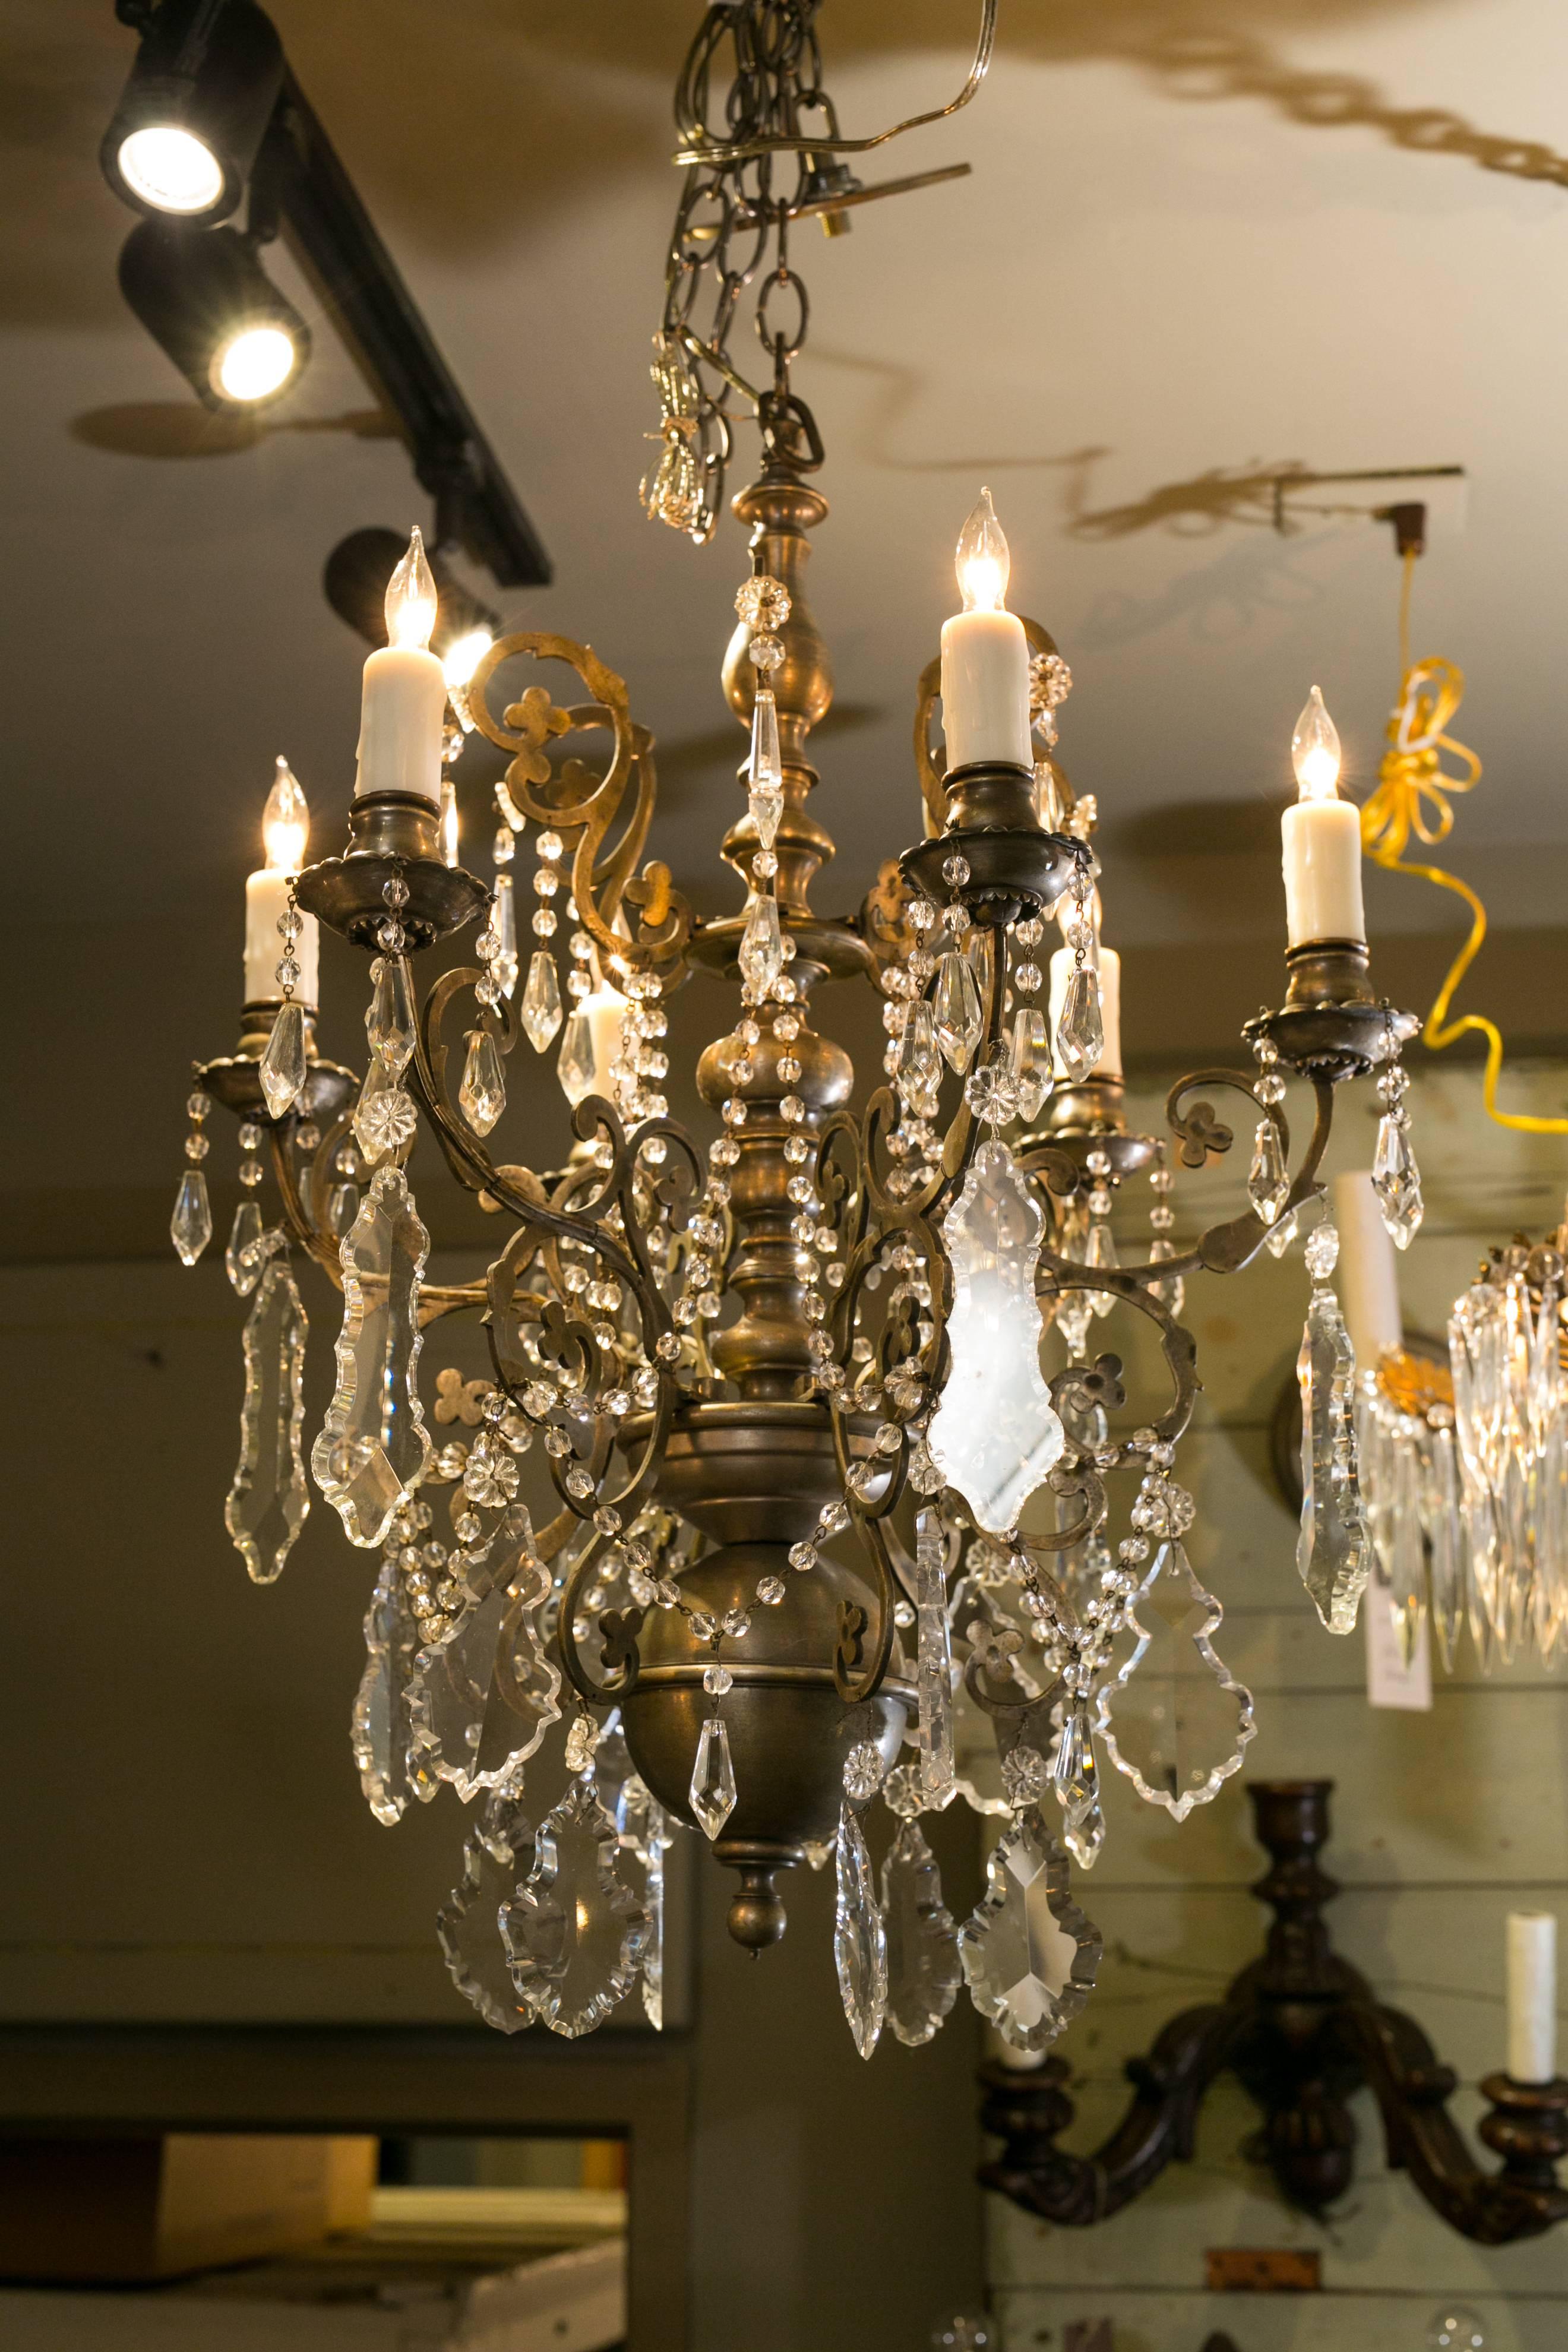 Mid-20th Century Pewter Colored Crystal Chandelier with Six Arms from Belgium, circa 1930